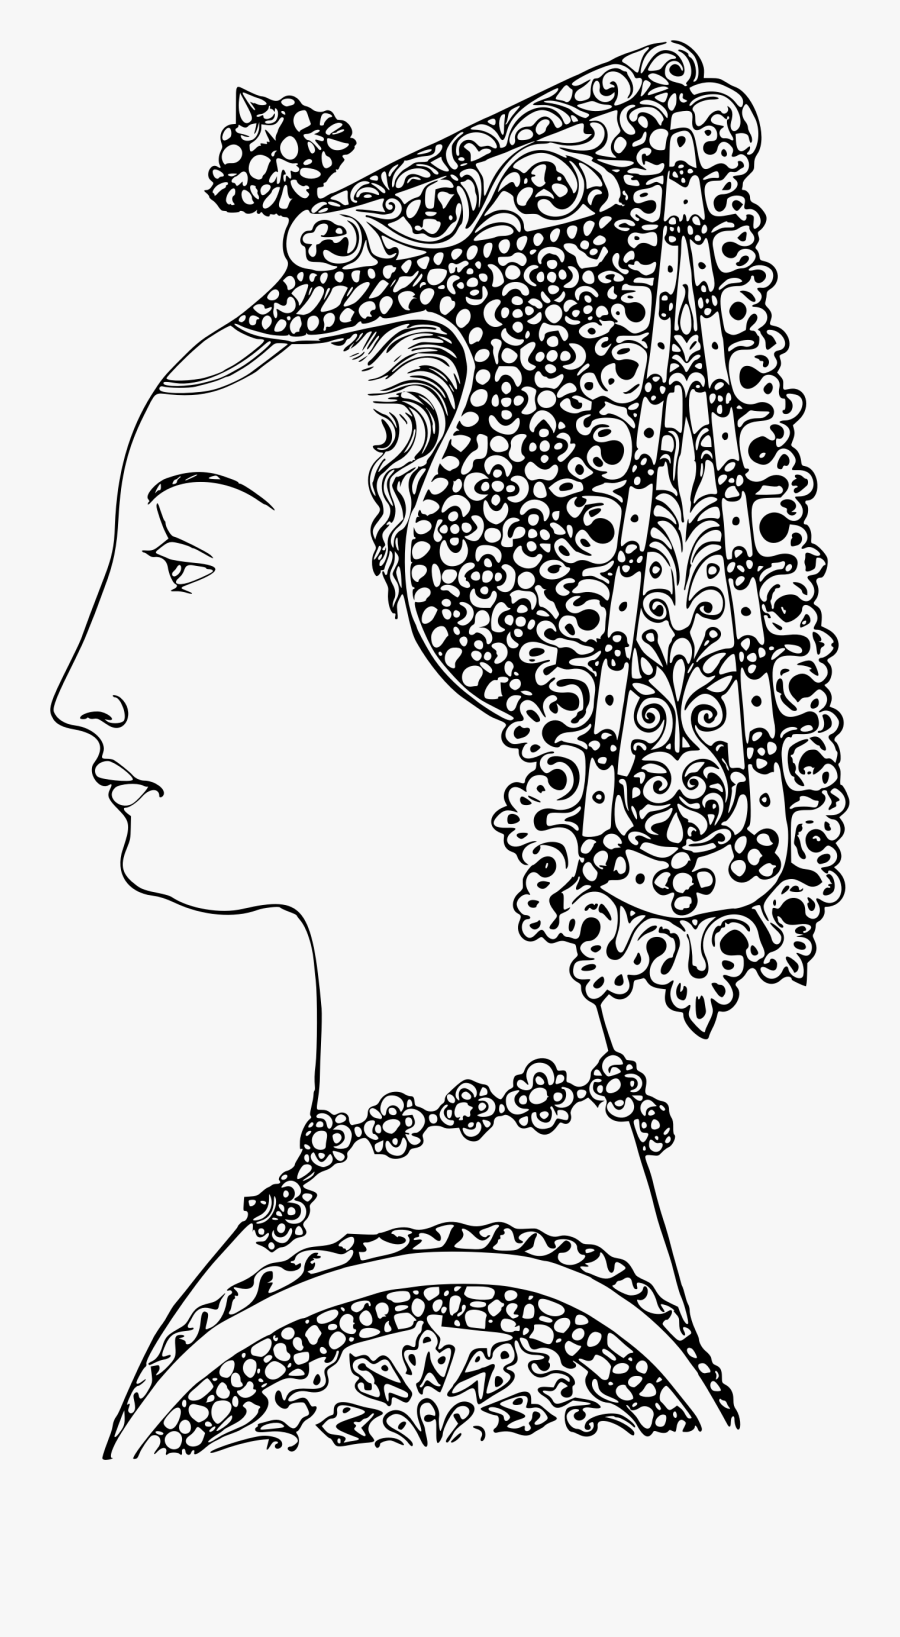 Lady With Ornate Headdress Clip Arts - Illustration, Transparent Clipart